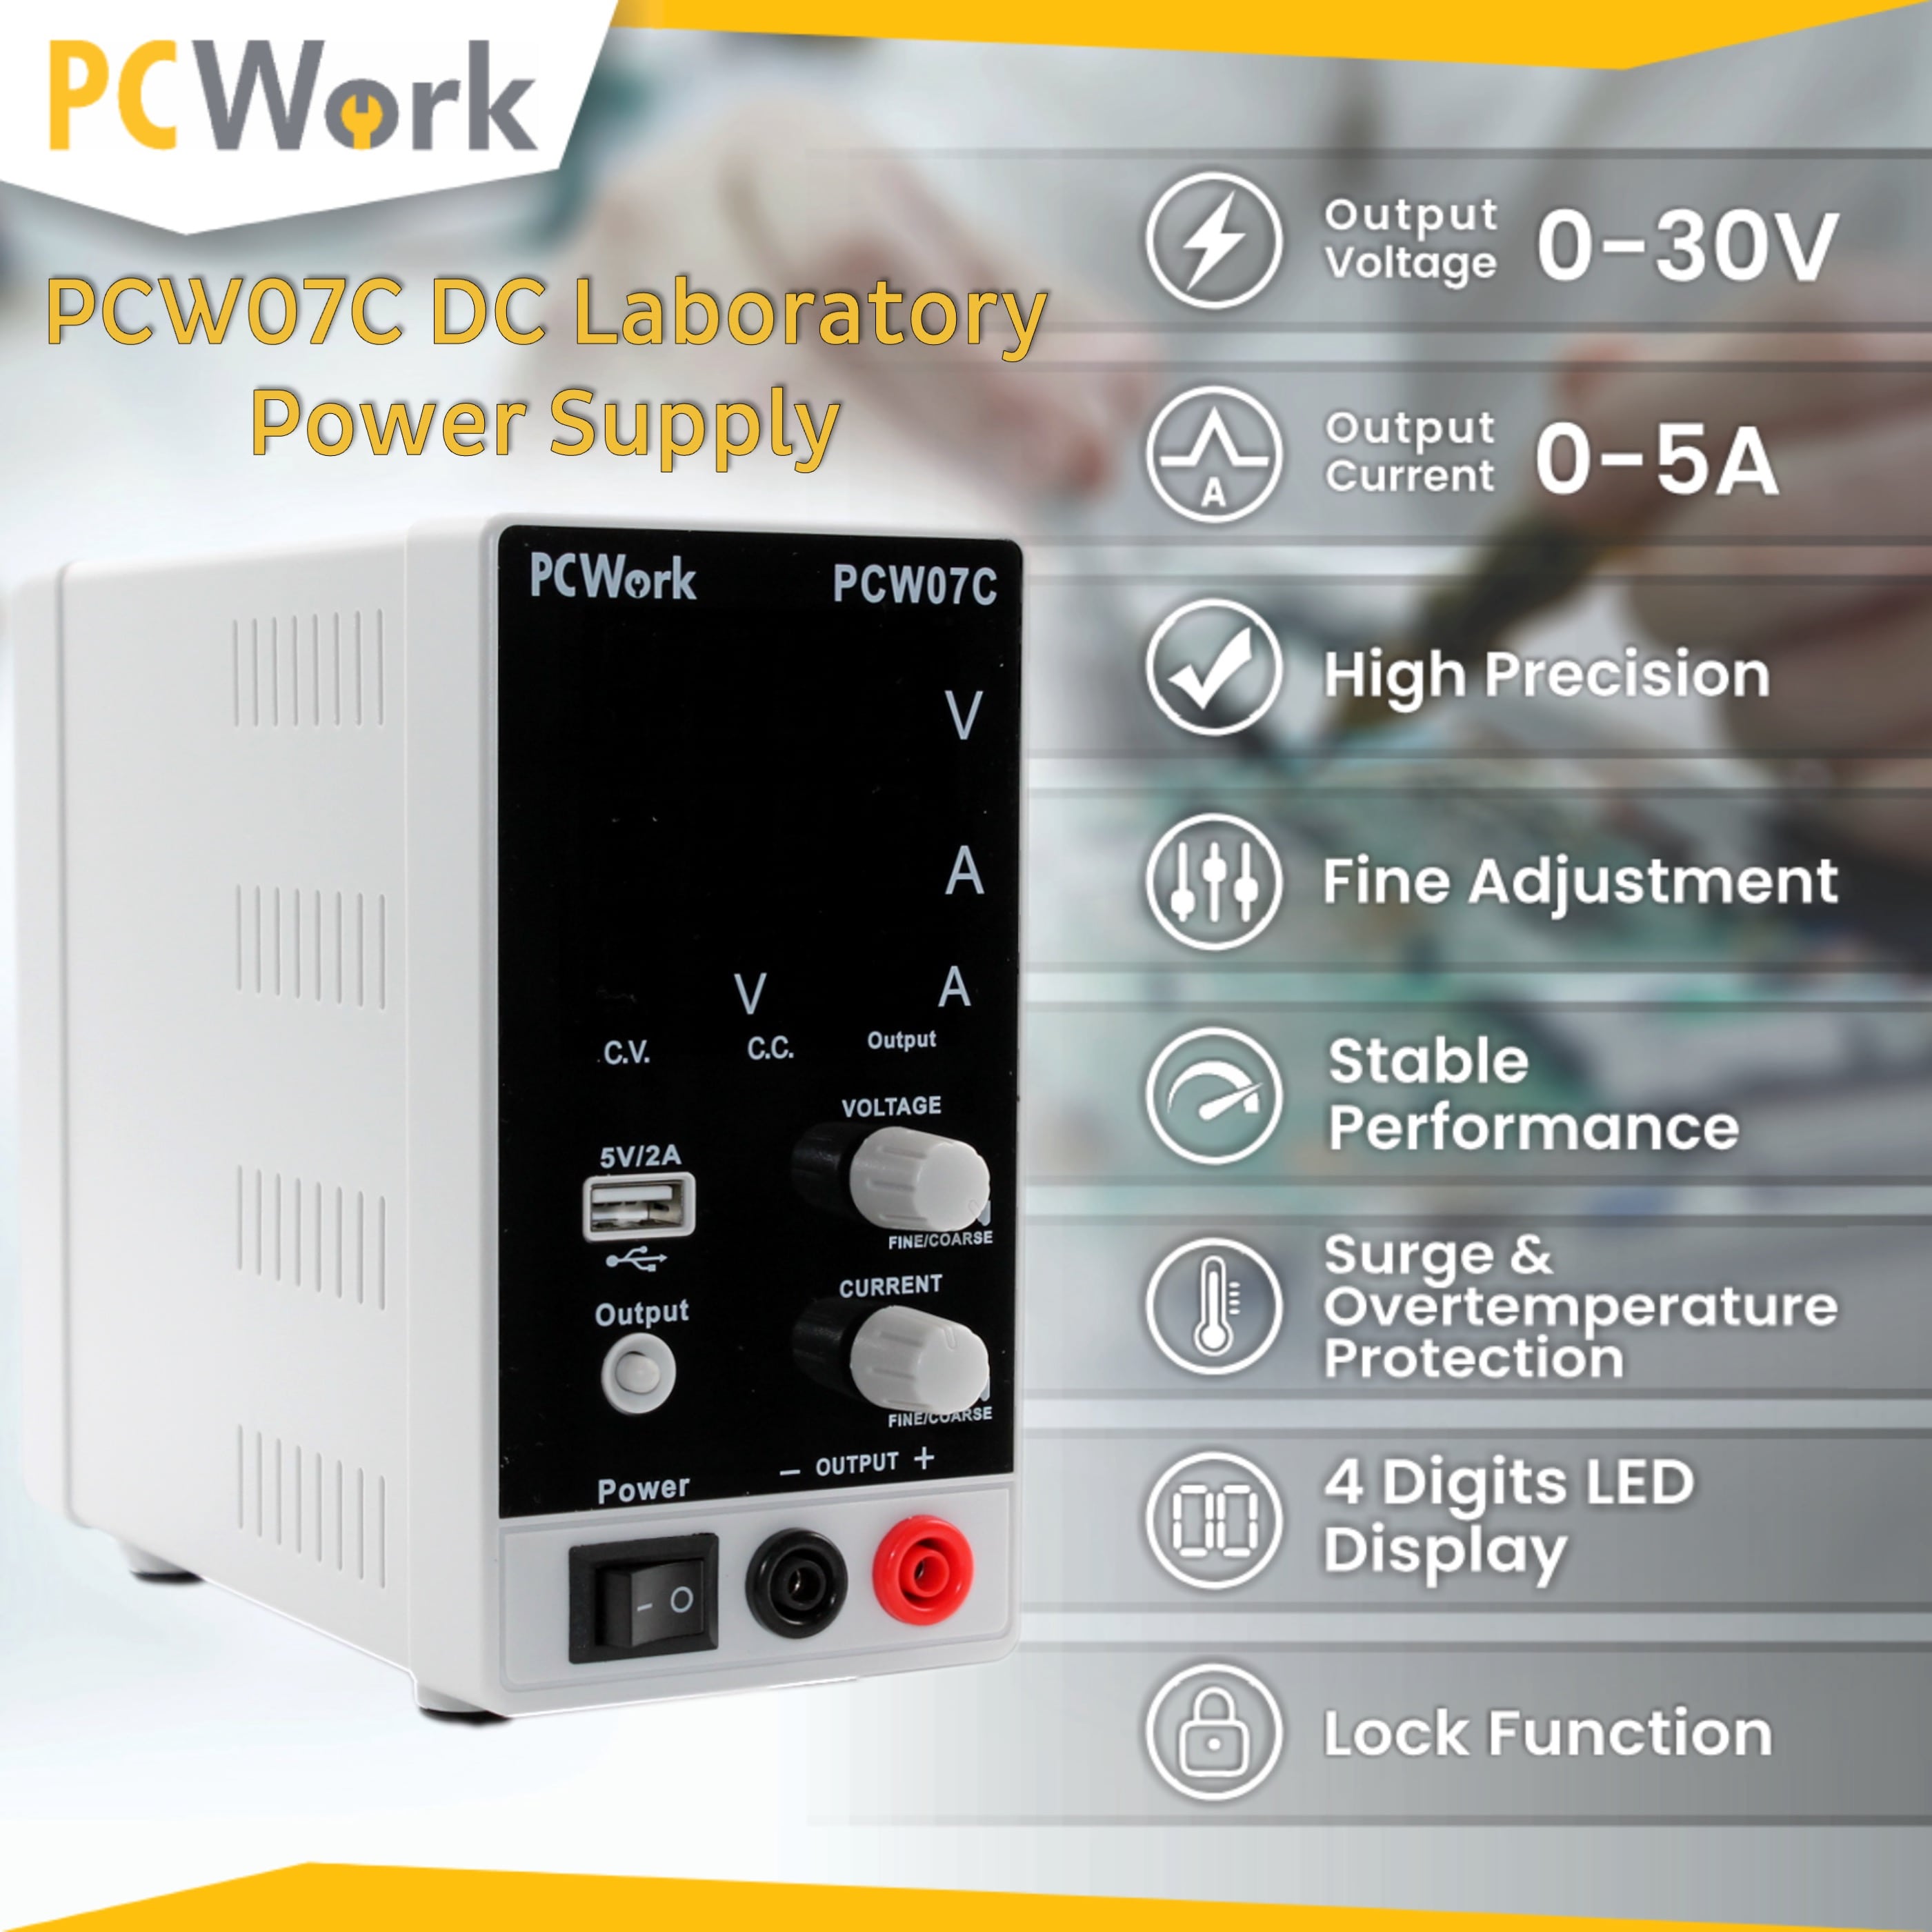 PCW07C Laboratory Power supply, DC Switching Power Supply 0-30V, 0-5A